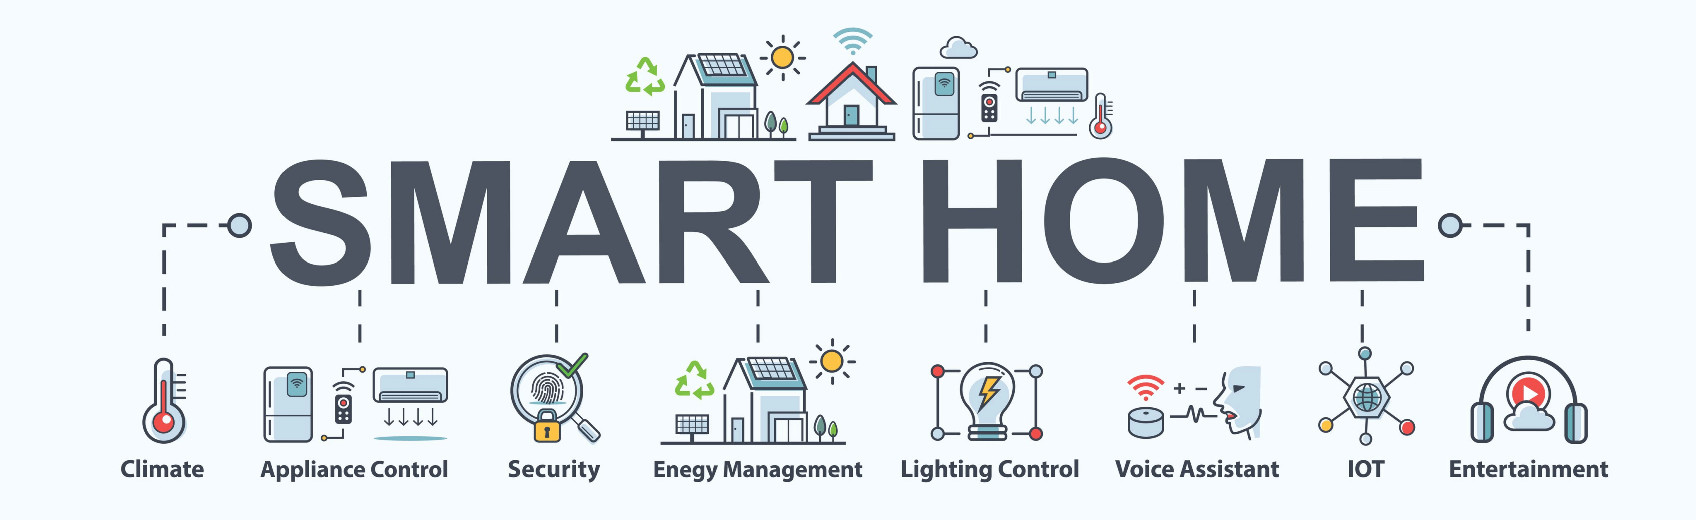 Smart Home Systems Icons